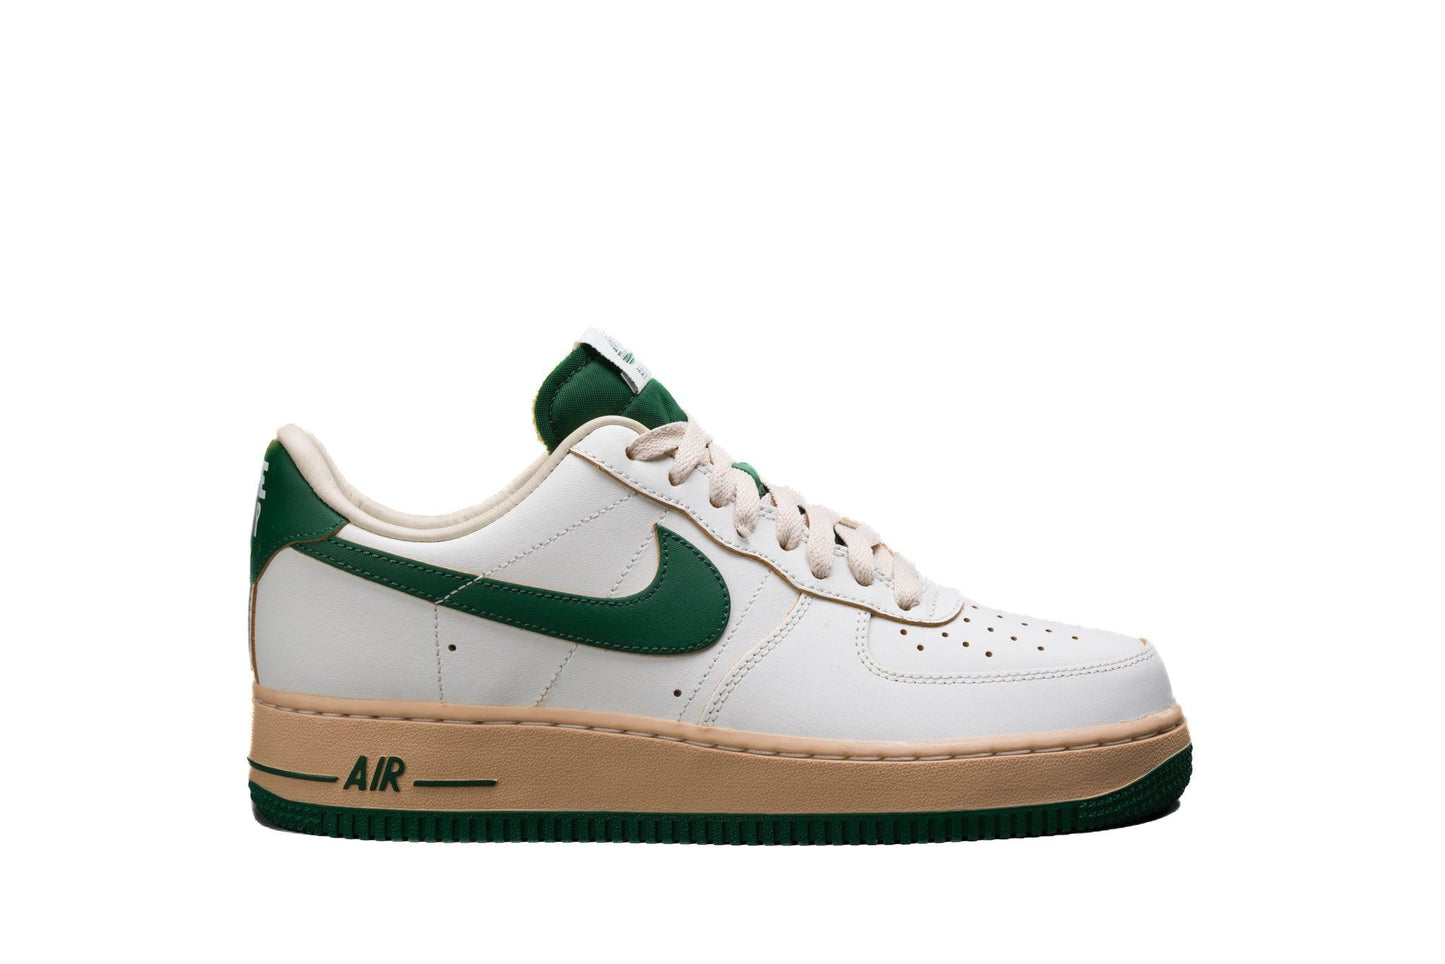 nike air force 1 low vintage gorge green lo10m 6 1445x